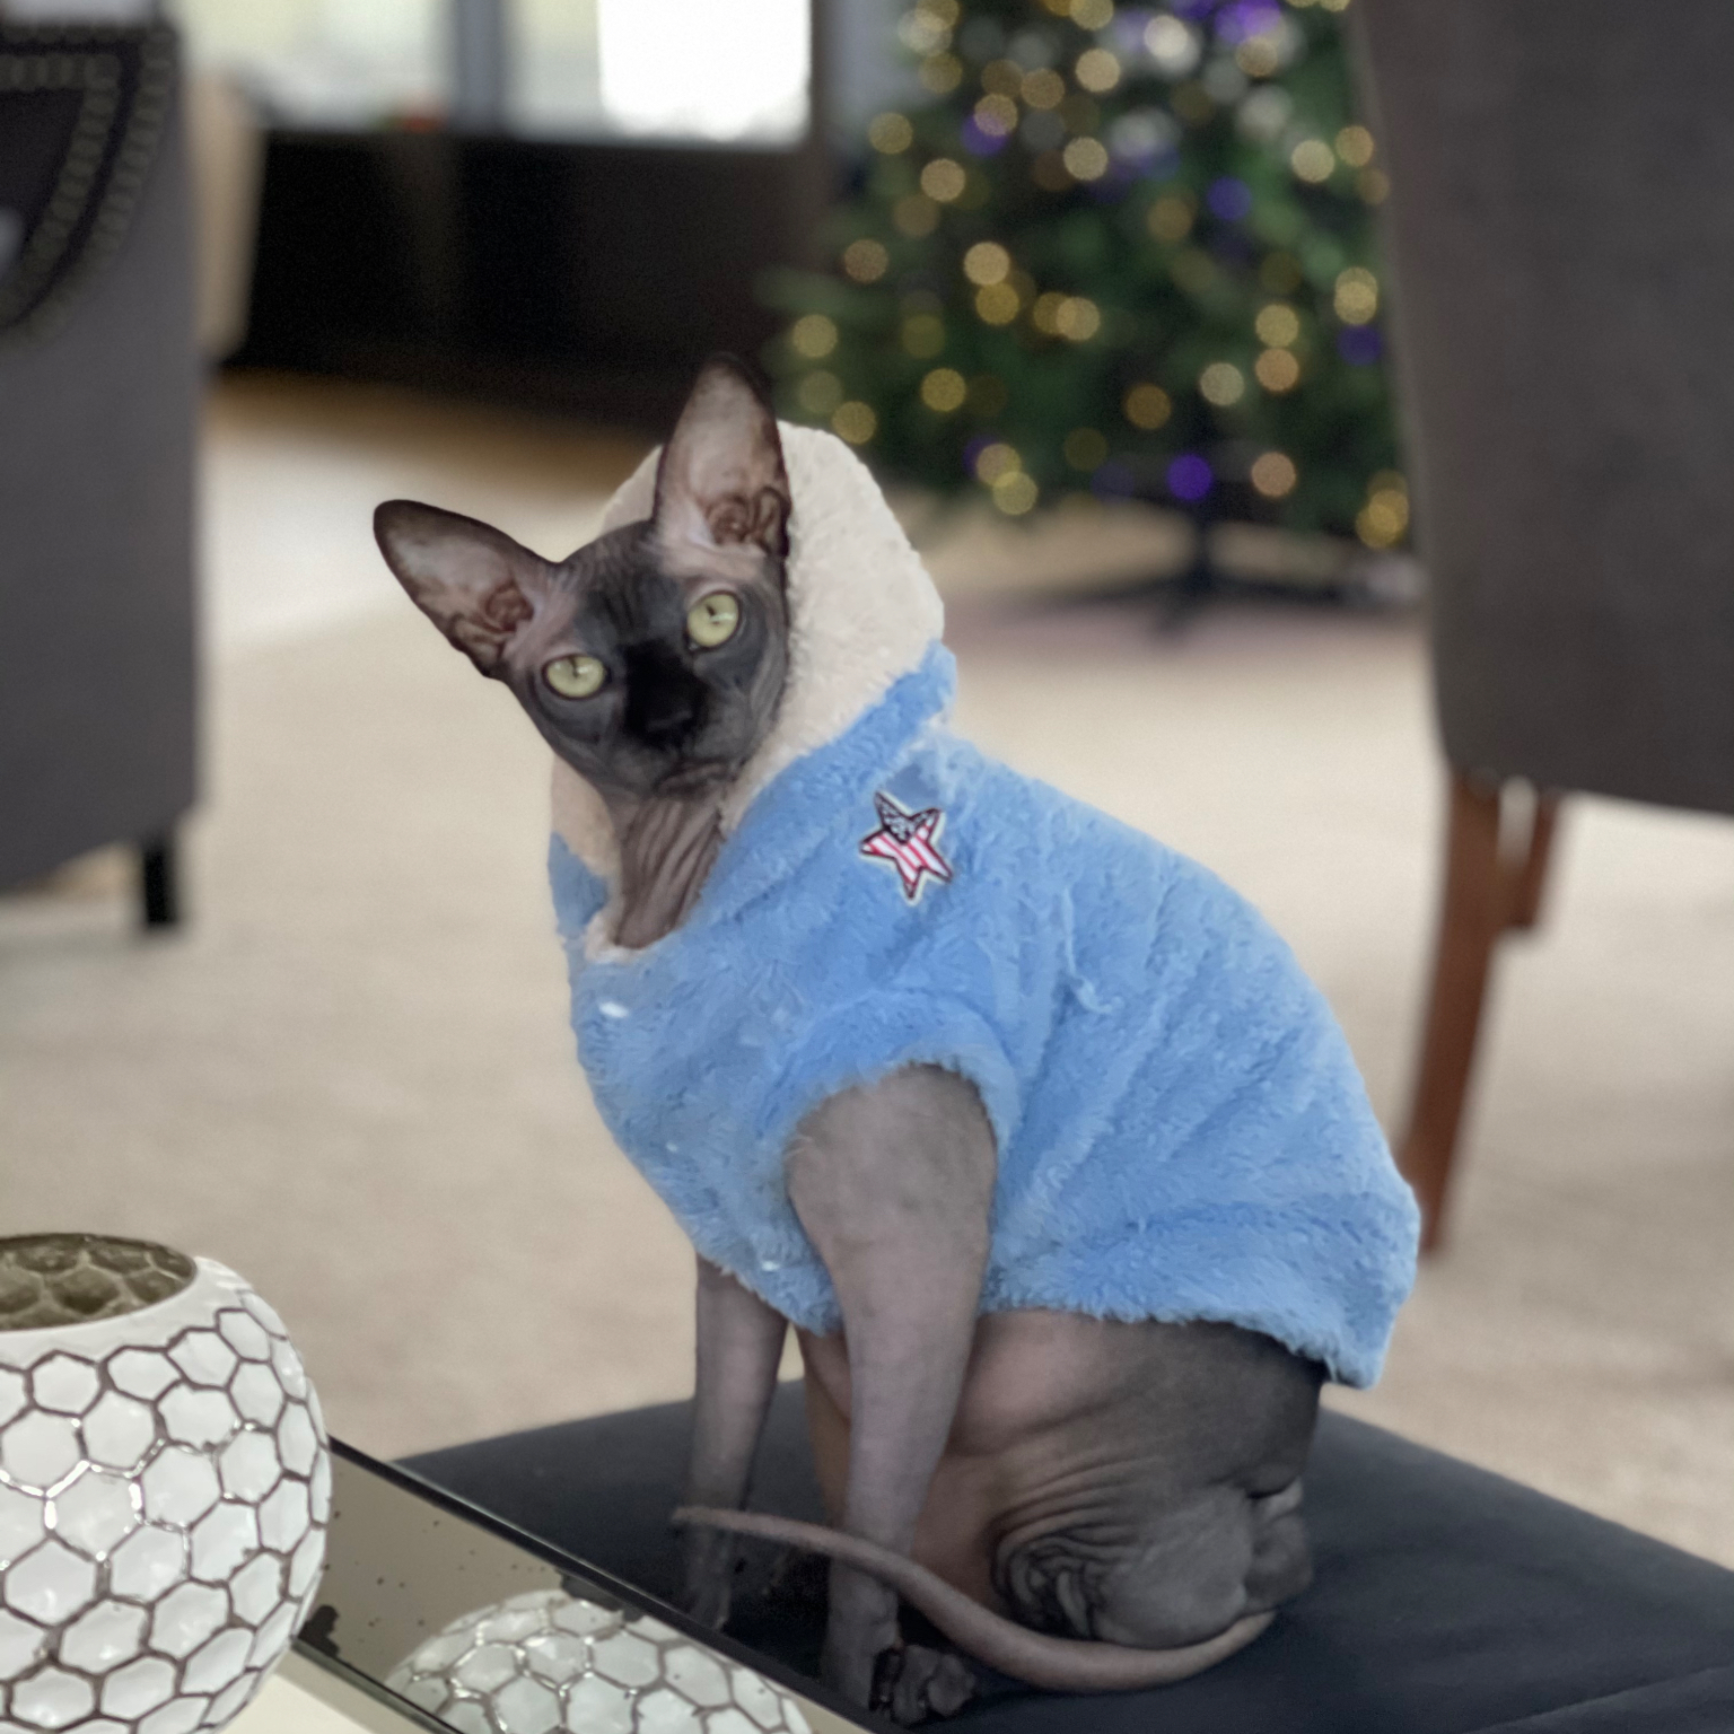 This is Dodger. He is a Sphynx cat who is clearly into fashion.